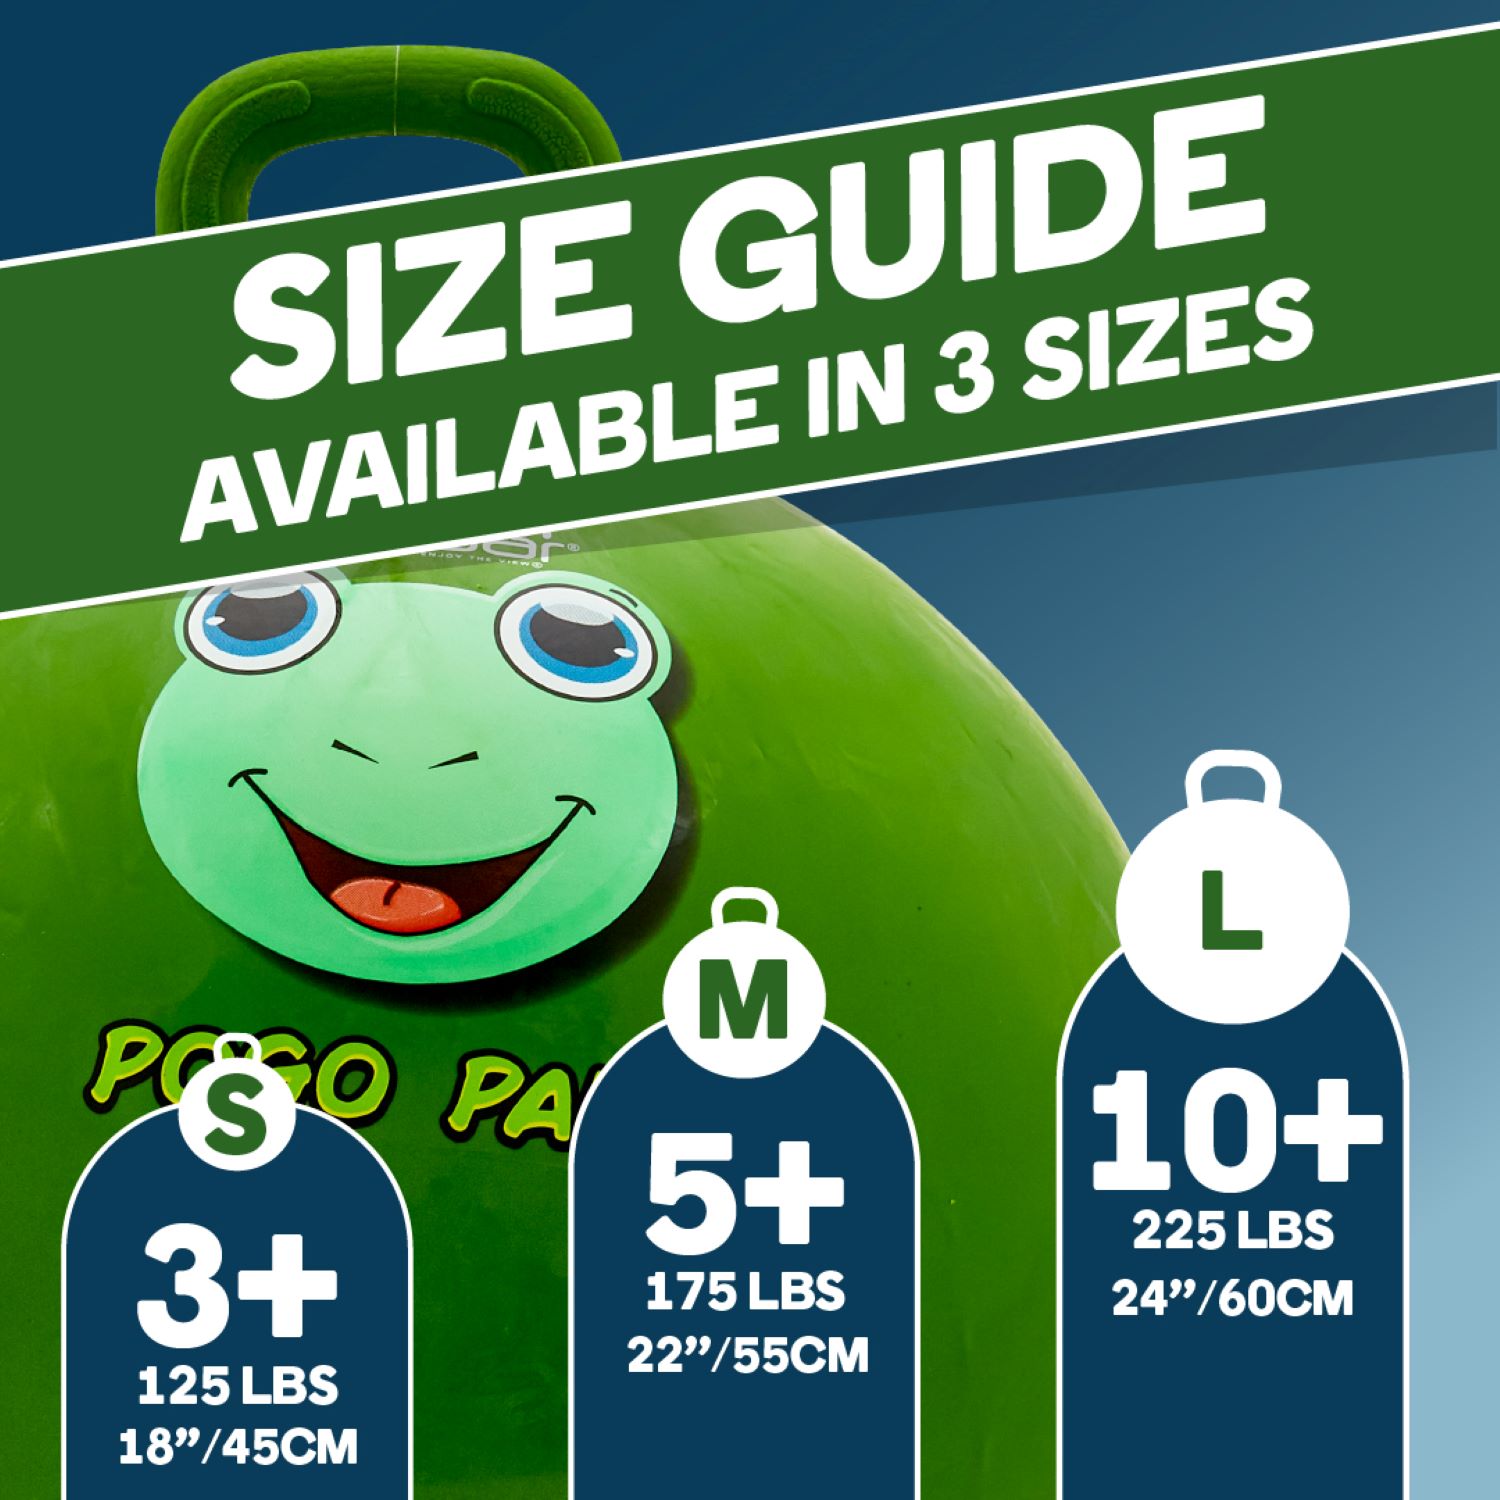 Flybar Hopper Ball for Kids - Bouncy Ball with Handle, Durable Bouncy Balls,, 225lbs, Ages 10+, Green Frog, L - image 4 of 6